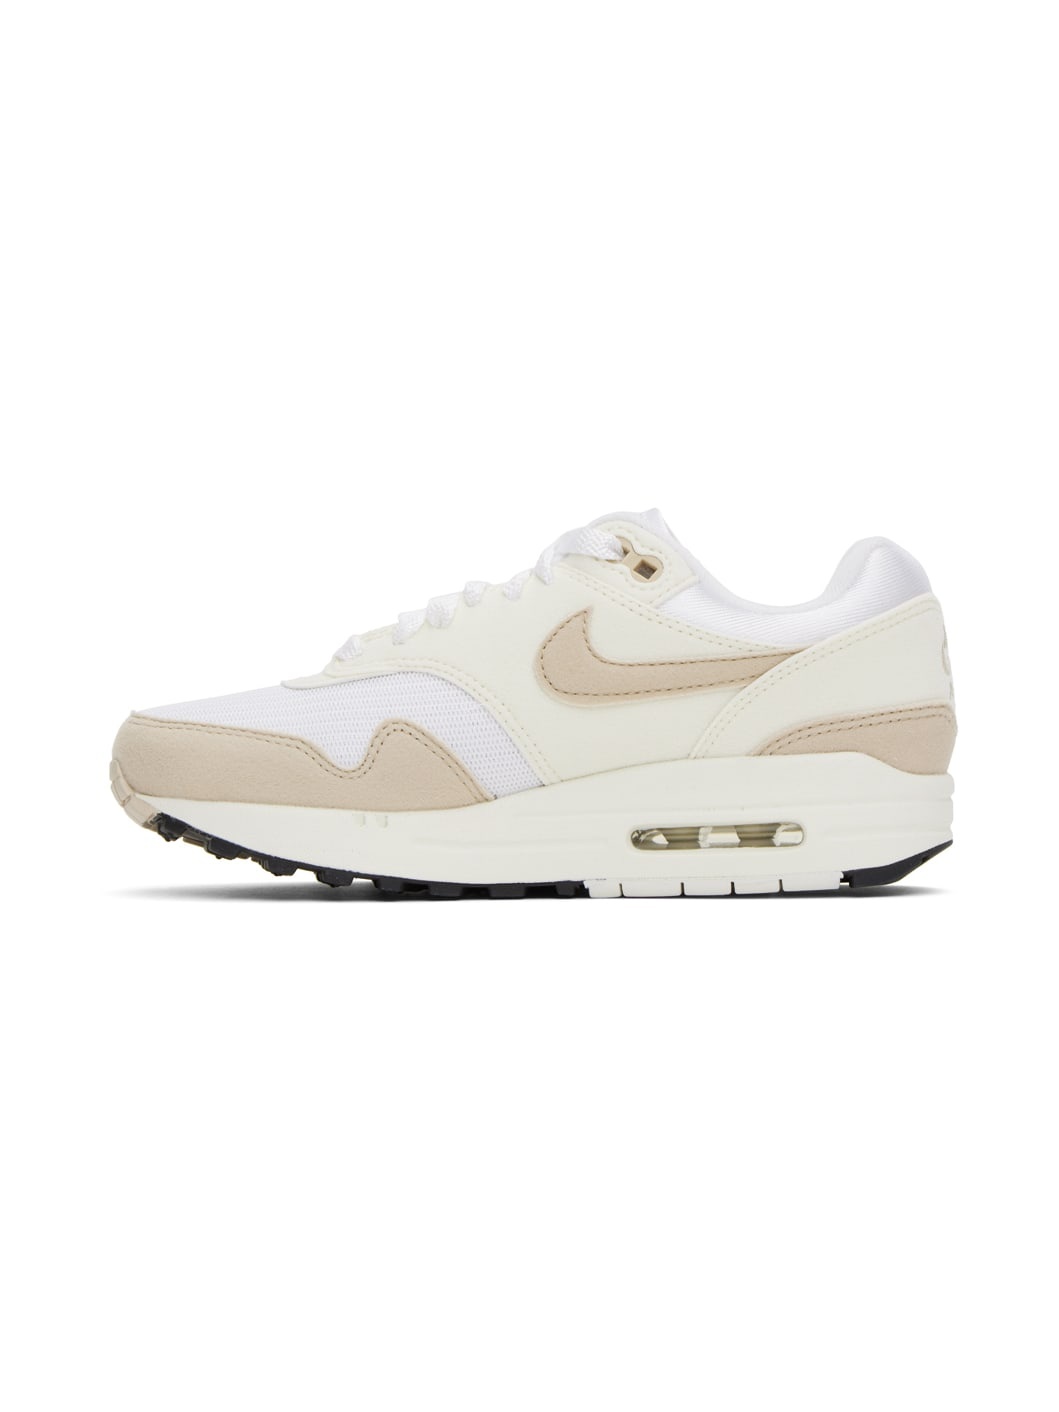 White & Beige Air Max 1 Sneakers - 3